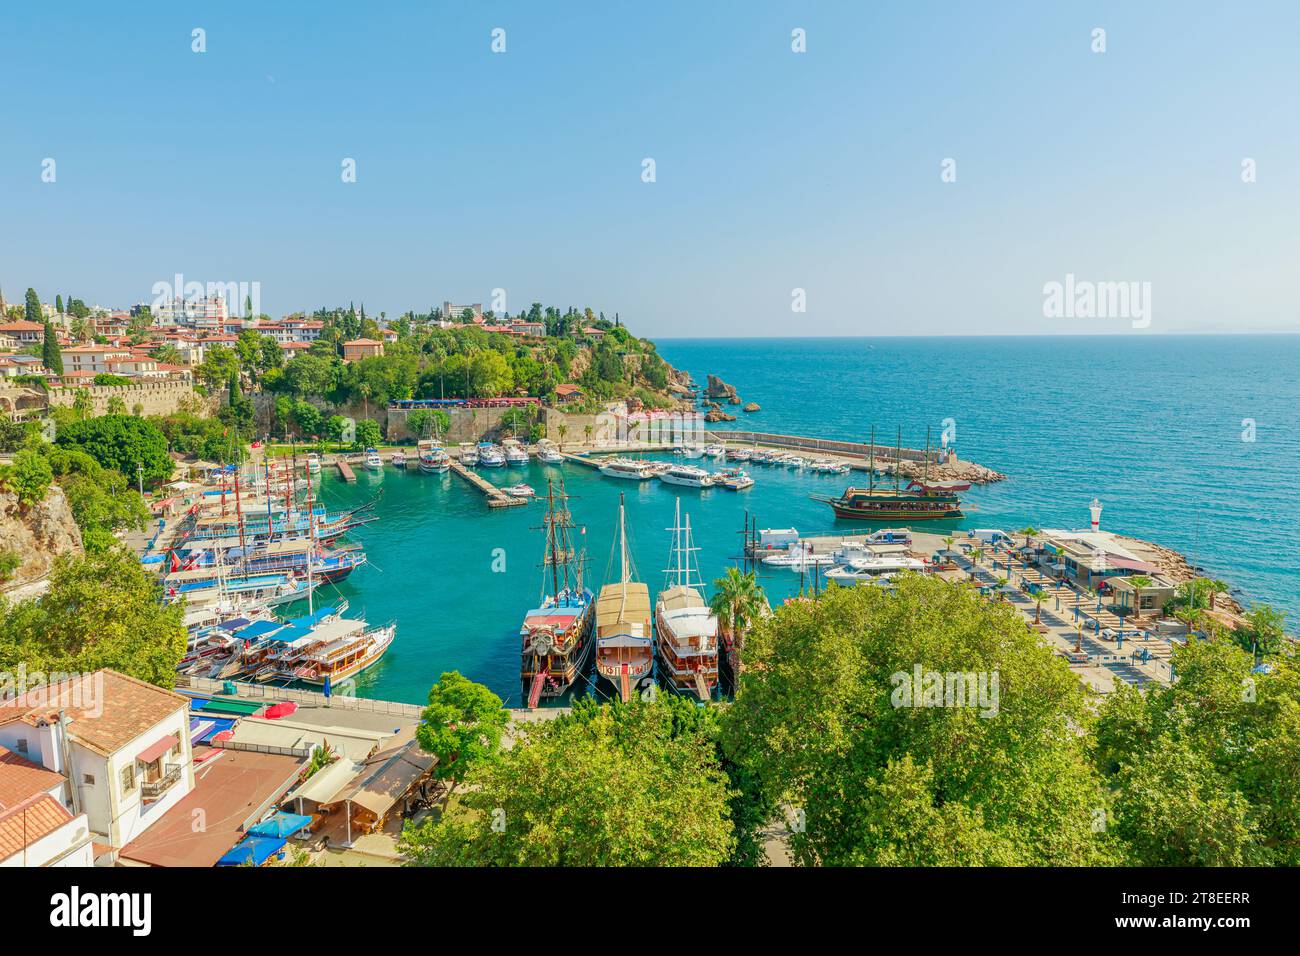 Panoramic view of Antalya, Turkey. Deep blue-green waters of the Mediterranean Sea meet a bustling harbor filled with boats of various sizes. A white Stock Photo